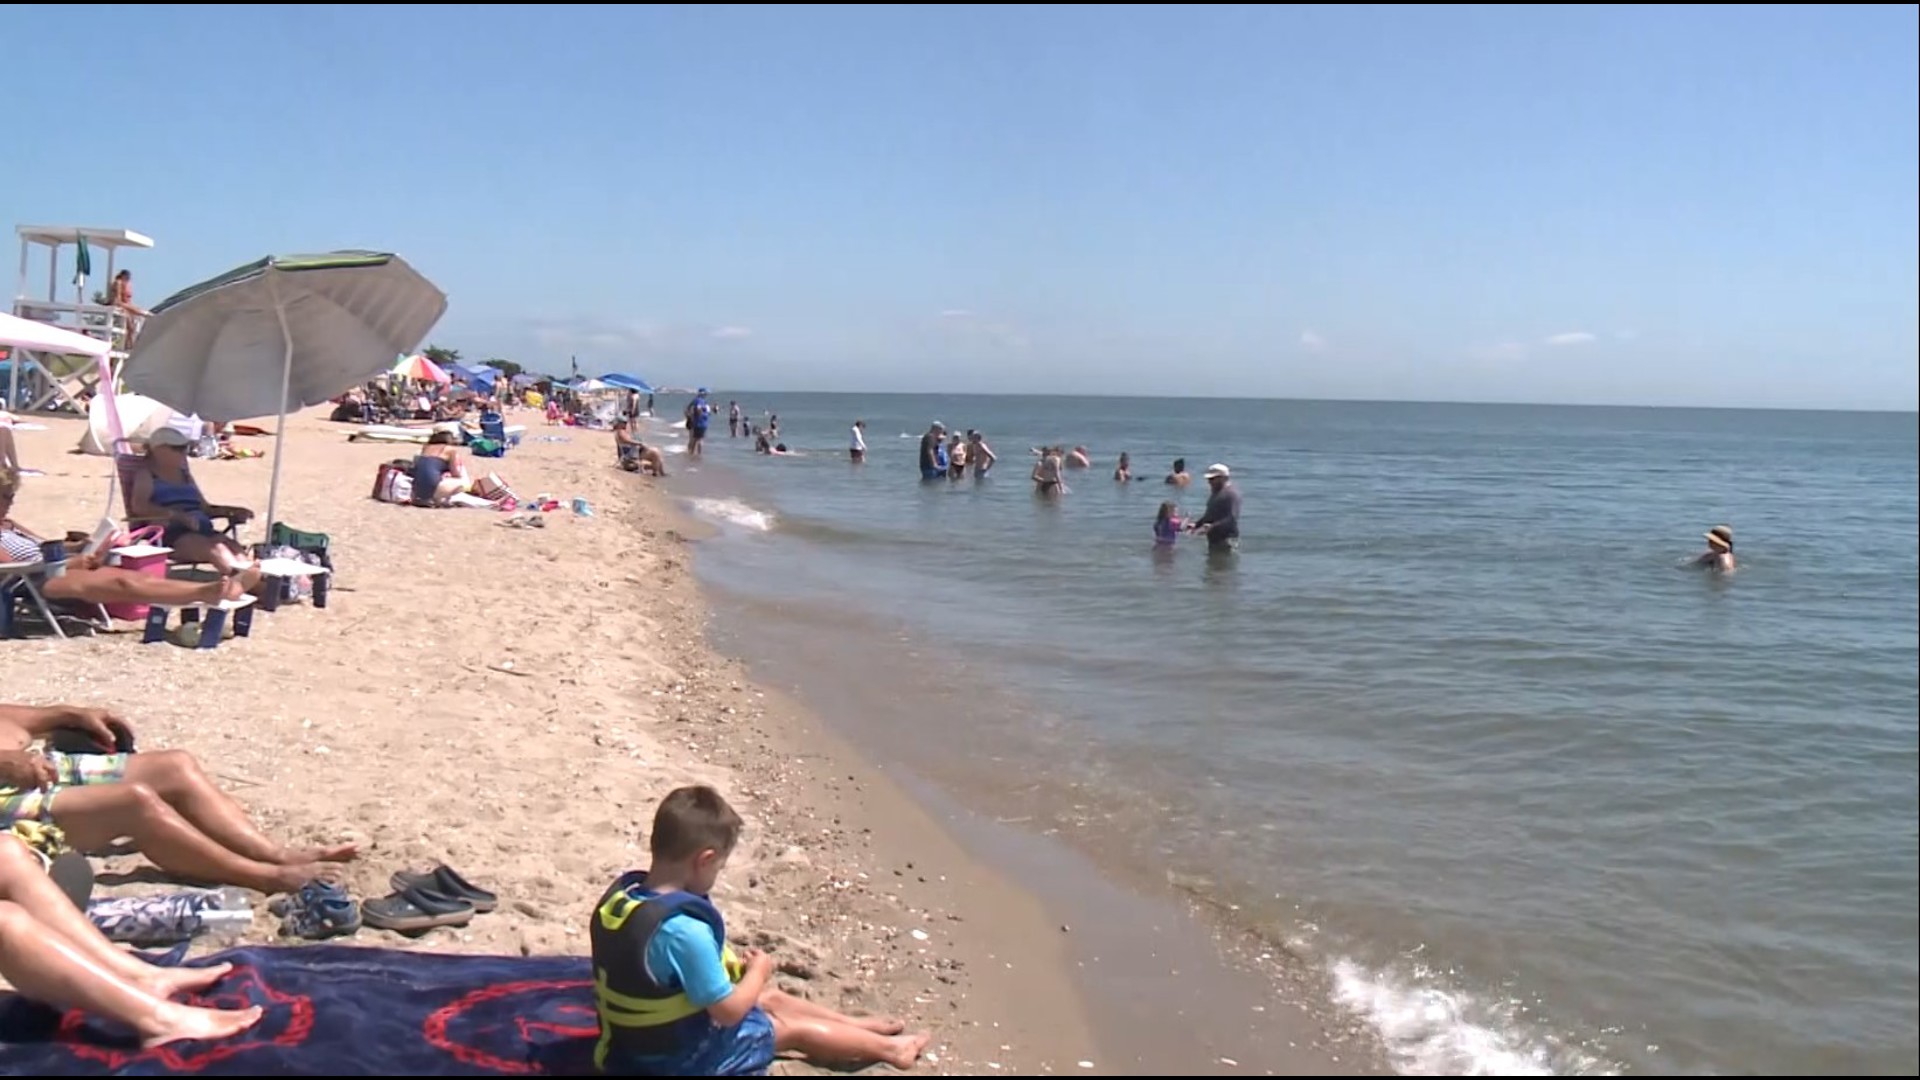 Two people died in the water on Thursday, prompting emergency officials to remind swimmers of water safety this summer.